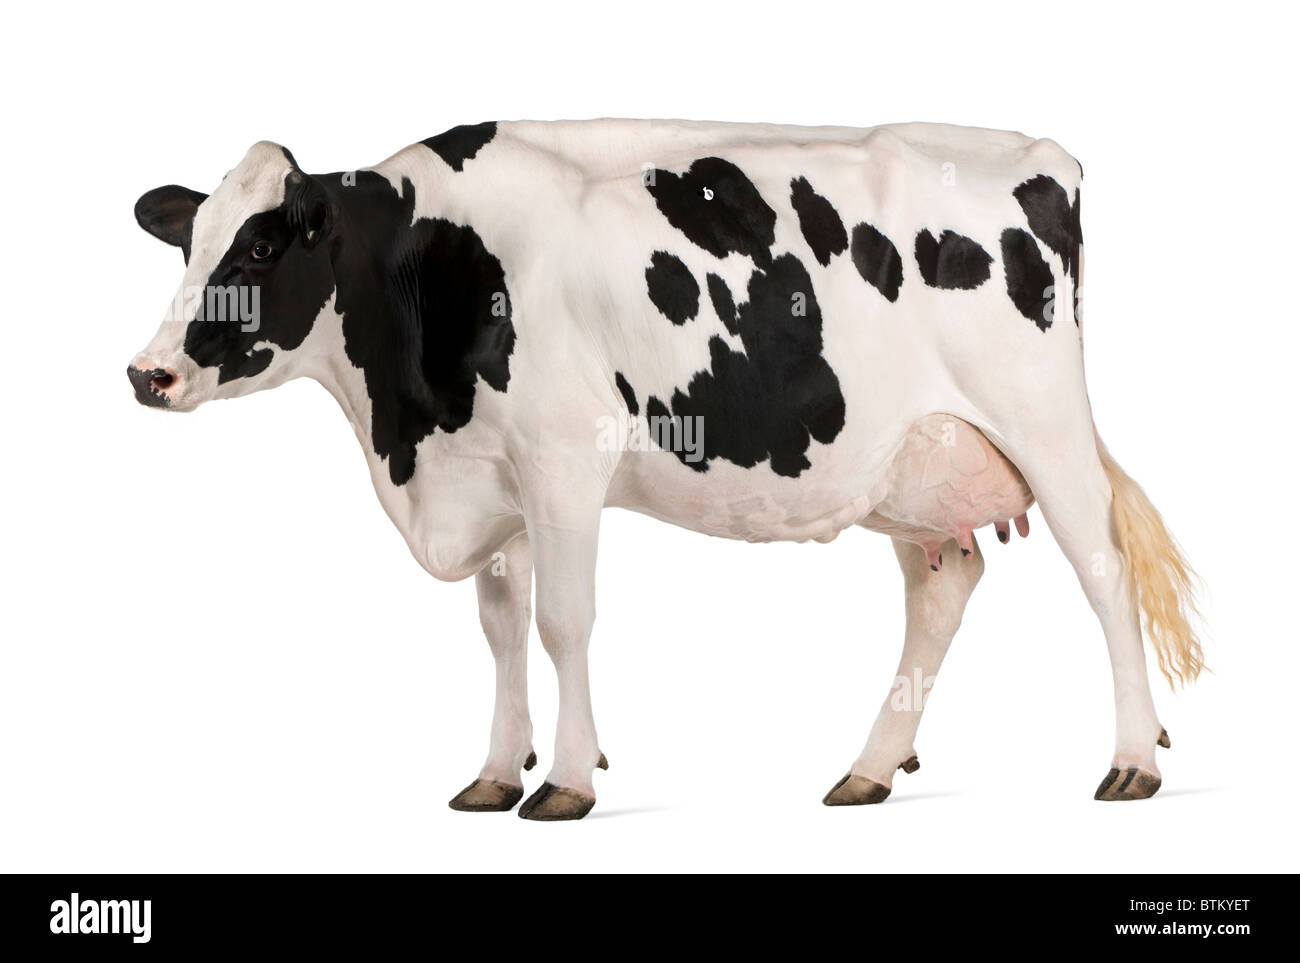 Top Quality Hf Cow at Best Price in Sirsa | Tarun Dairy Farm